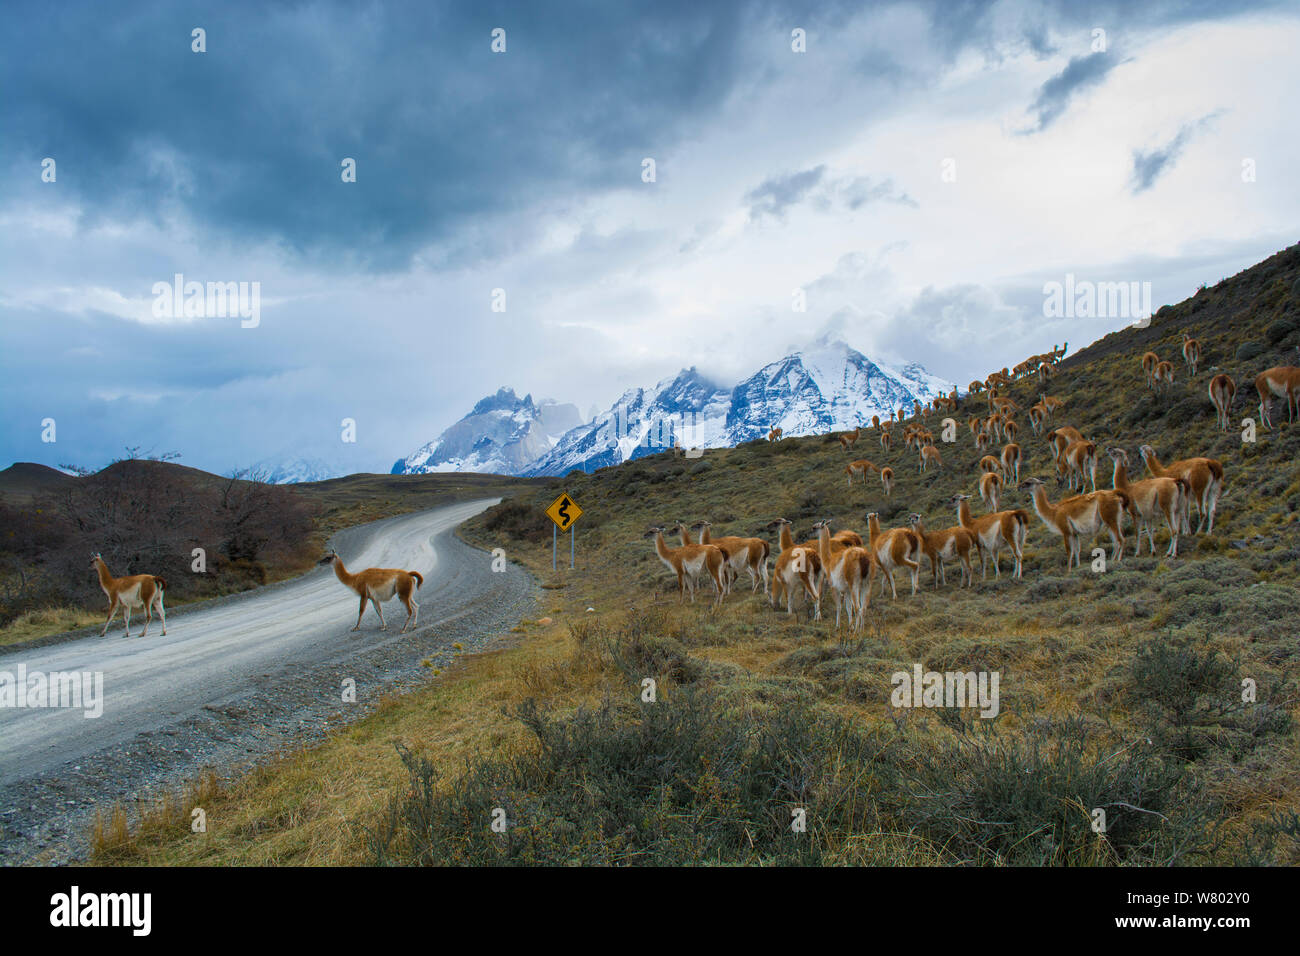 Guanacos (Lama Guanicoe) herd walking down slope to cross road, Torres del Paine National Park, Chile Stock Photo